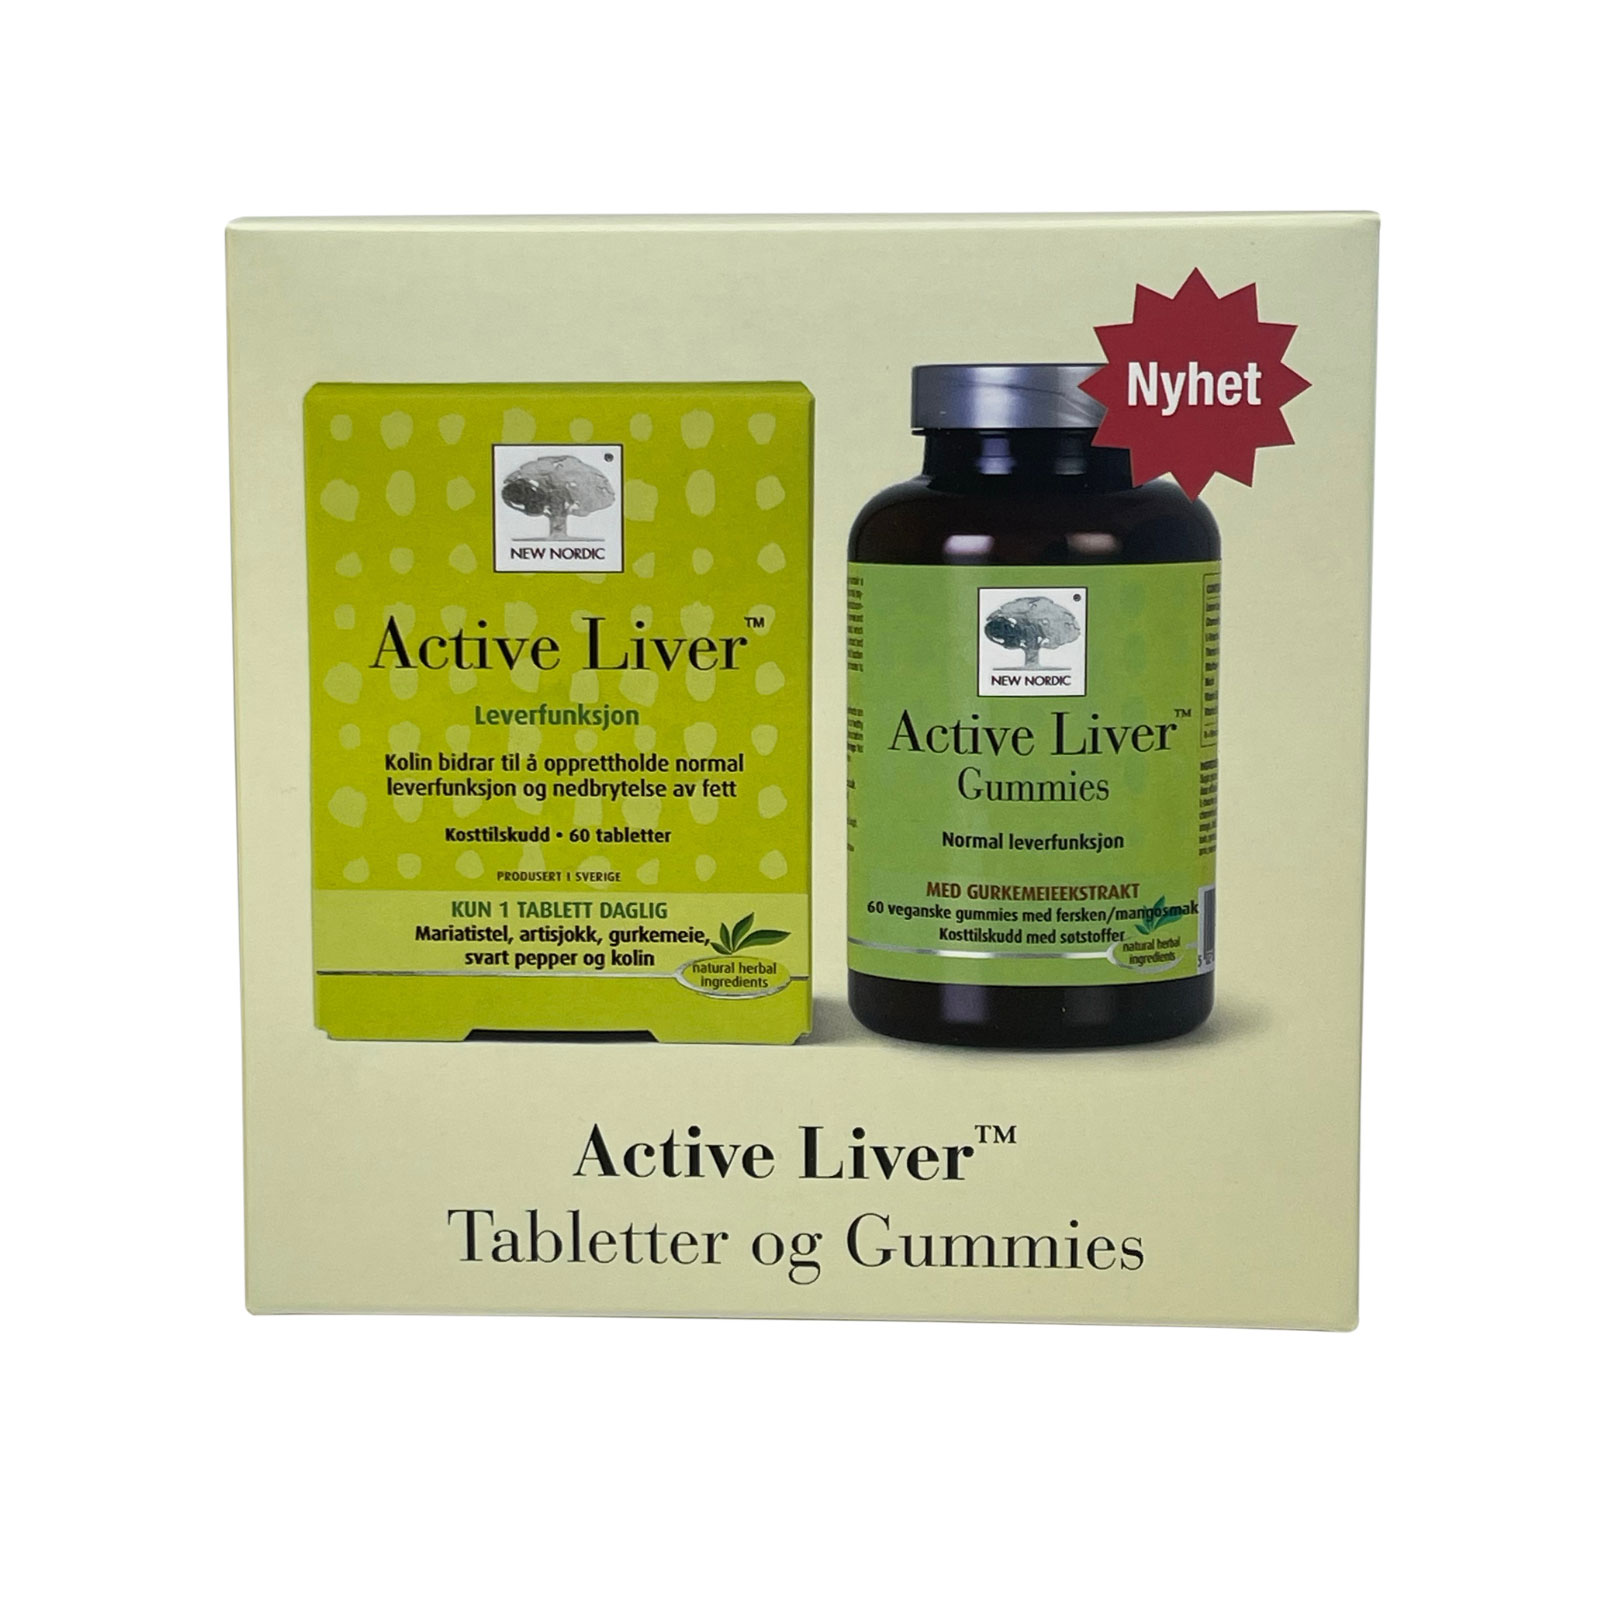 New Nordic Active Liver Duopack